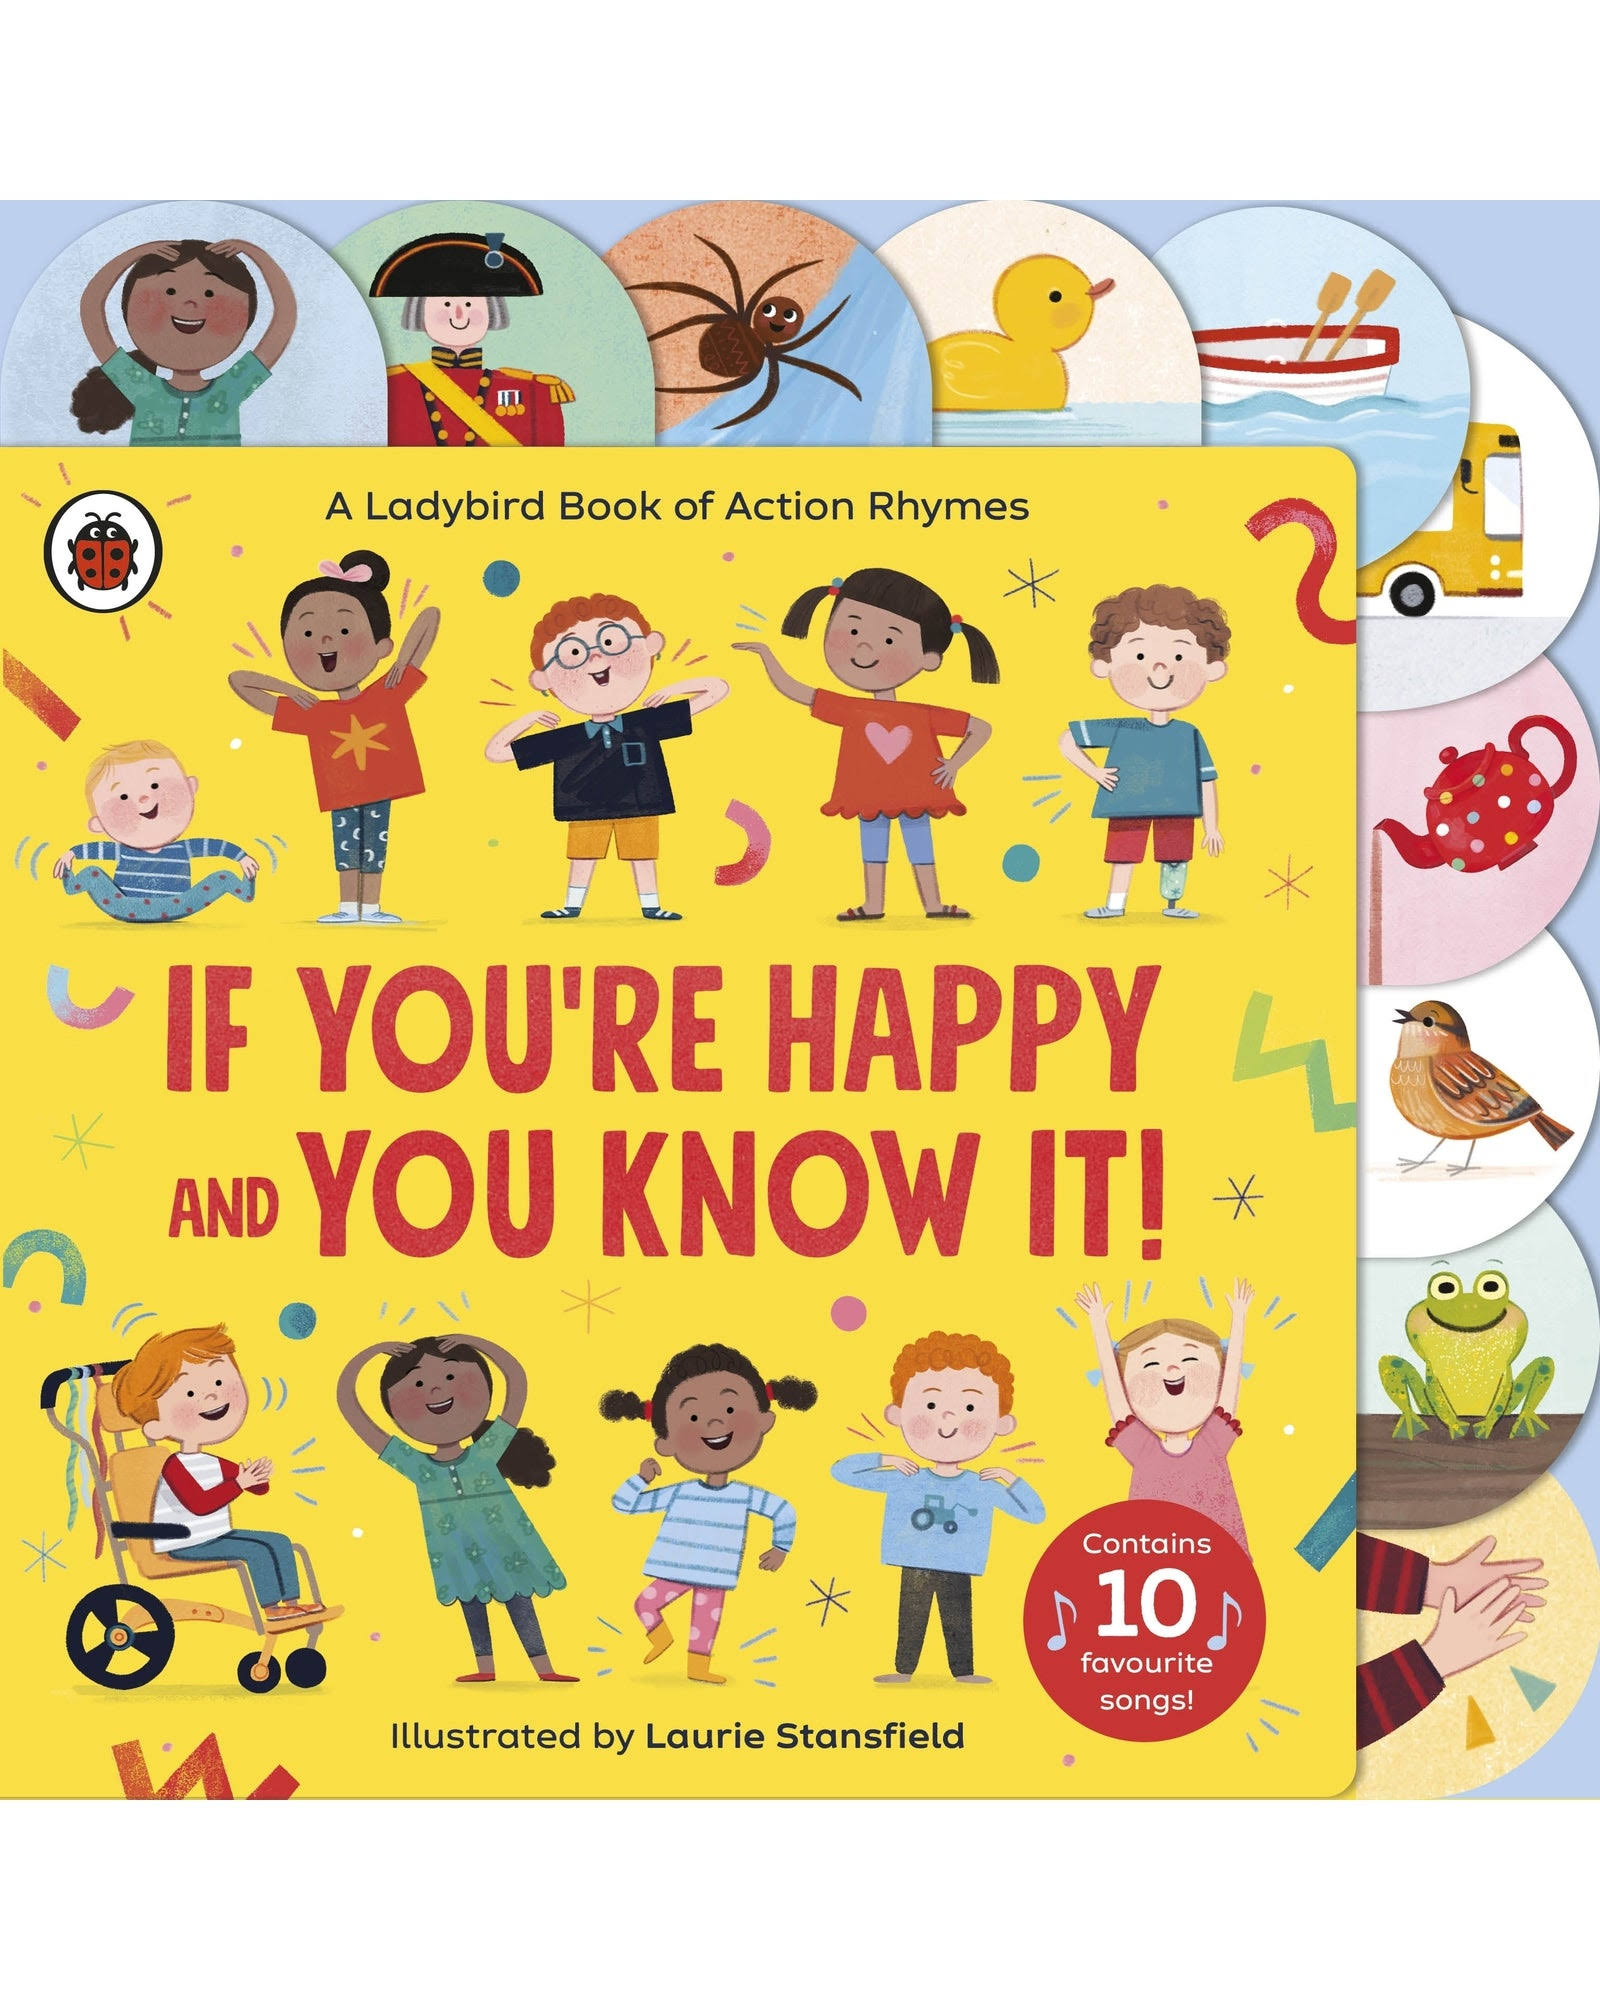 If You're Happy and You Know It: A Ladybird Book of Action Rhymes [Book]